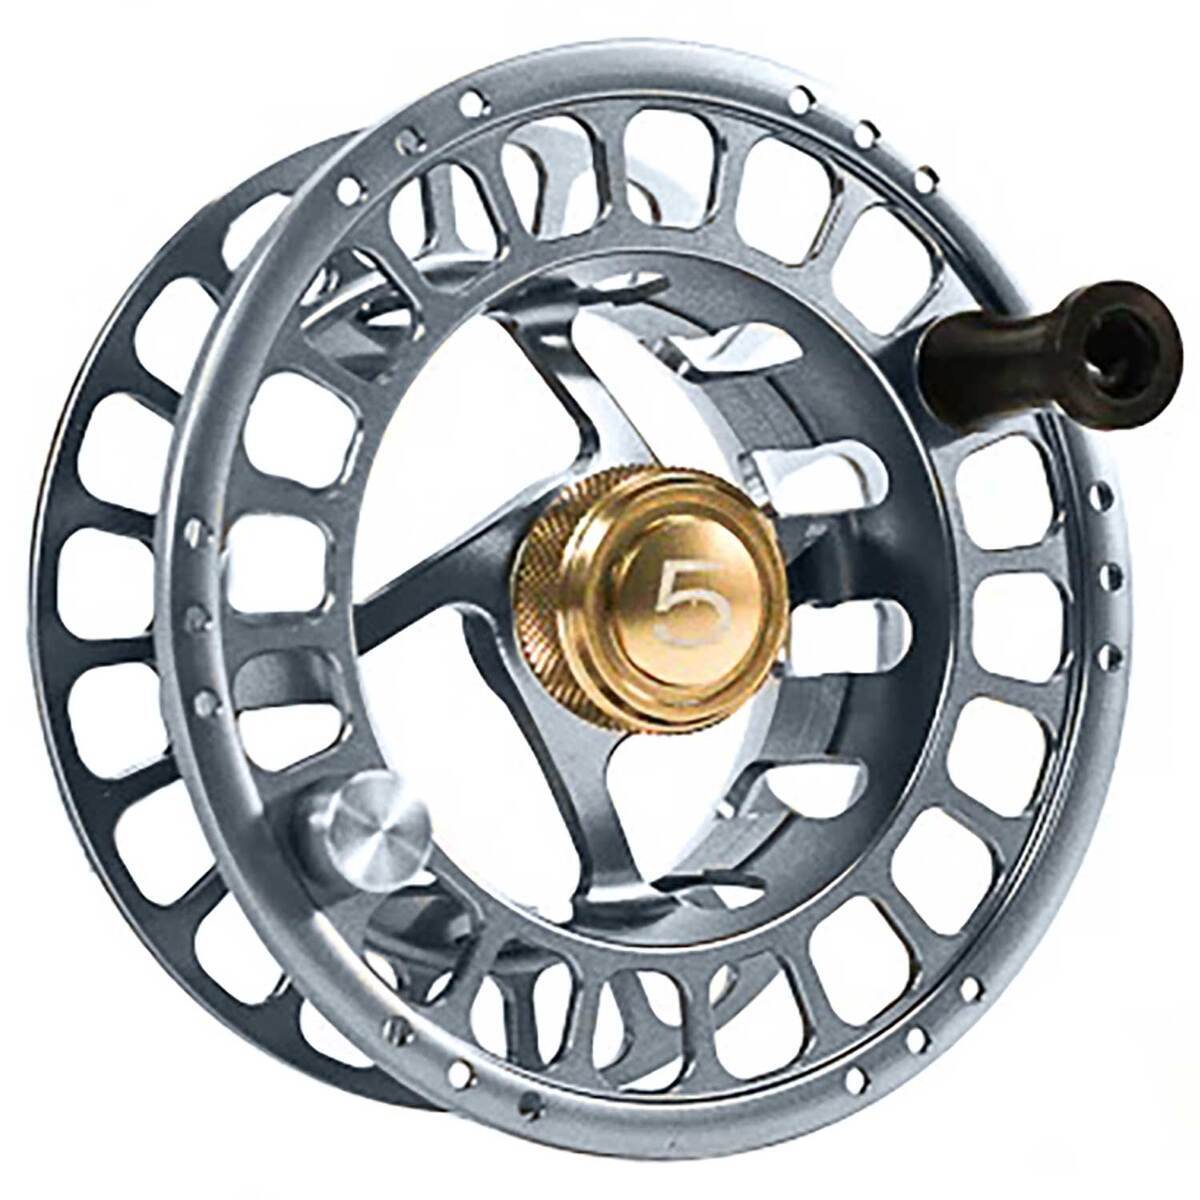 Maxxon Outfitters SDX Fly Spare Spool - Silver and Gold Large by Sportsman's Warehouse